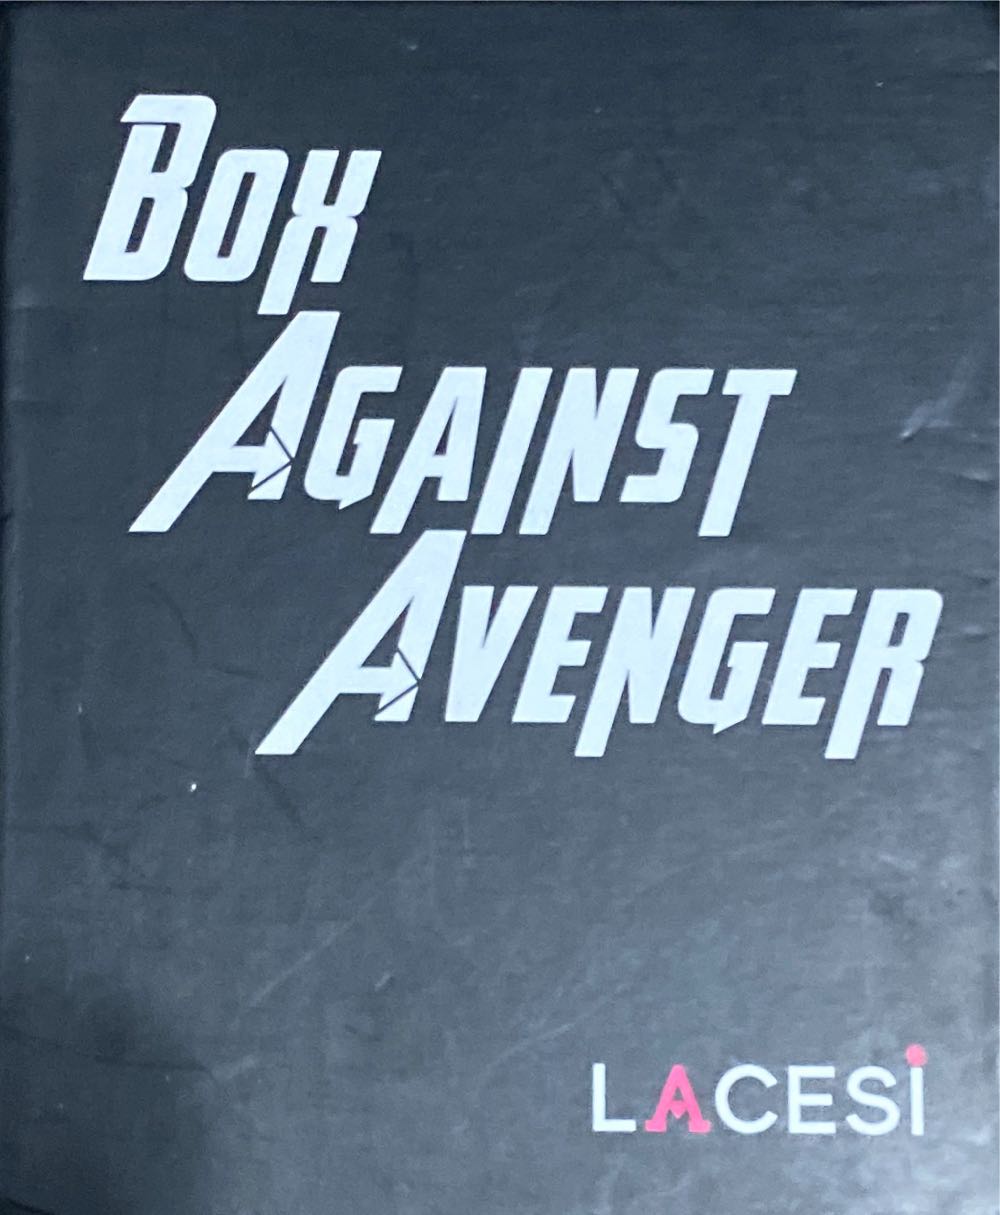 Box Against avenger  board game collectible - Main Image 1